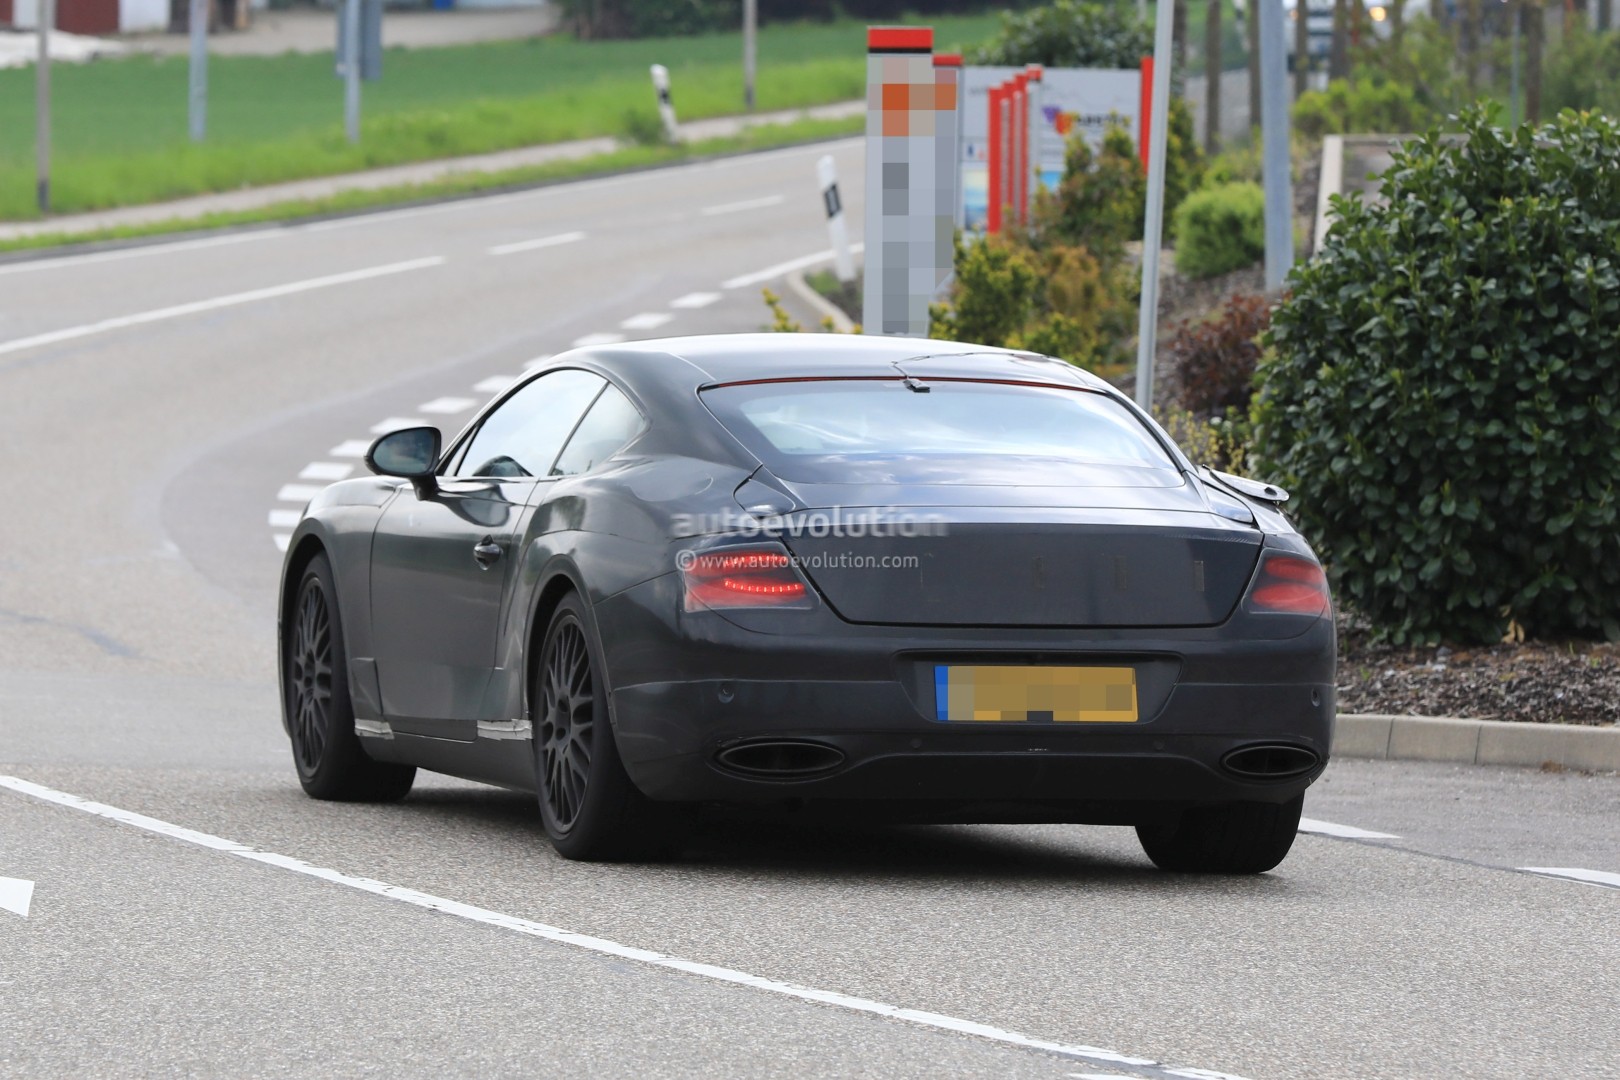 2017 - [Bentley] Continental GT - Page 2 2018-bentley-continental-gt-shows-new-features-in-first-interior-spyshots_10